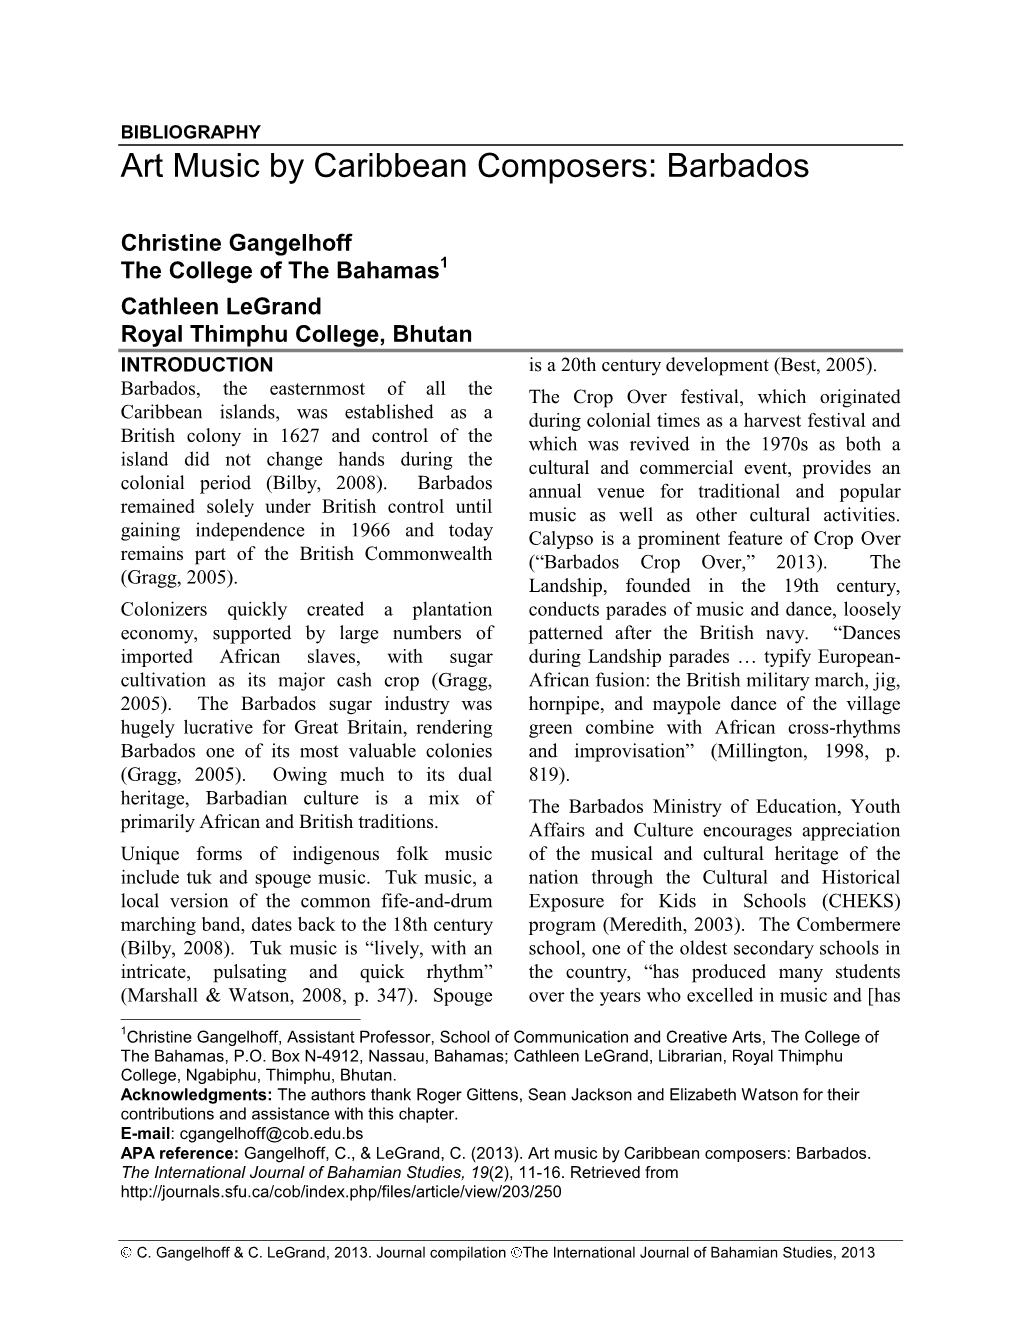 Art Music by Caribbean Composers: Barbados